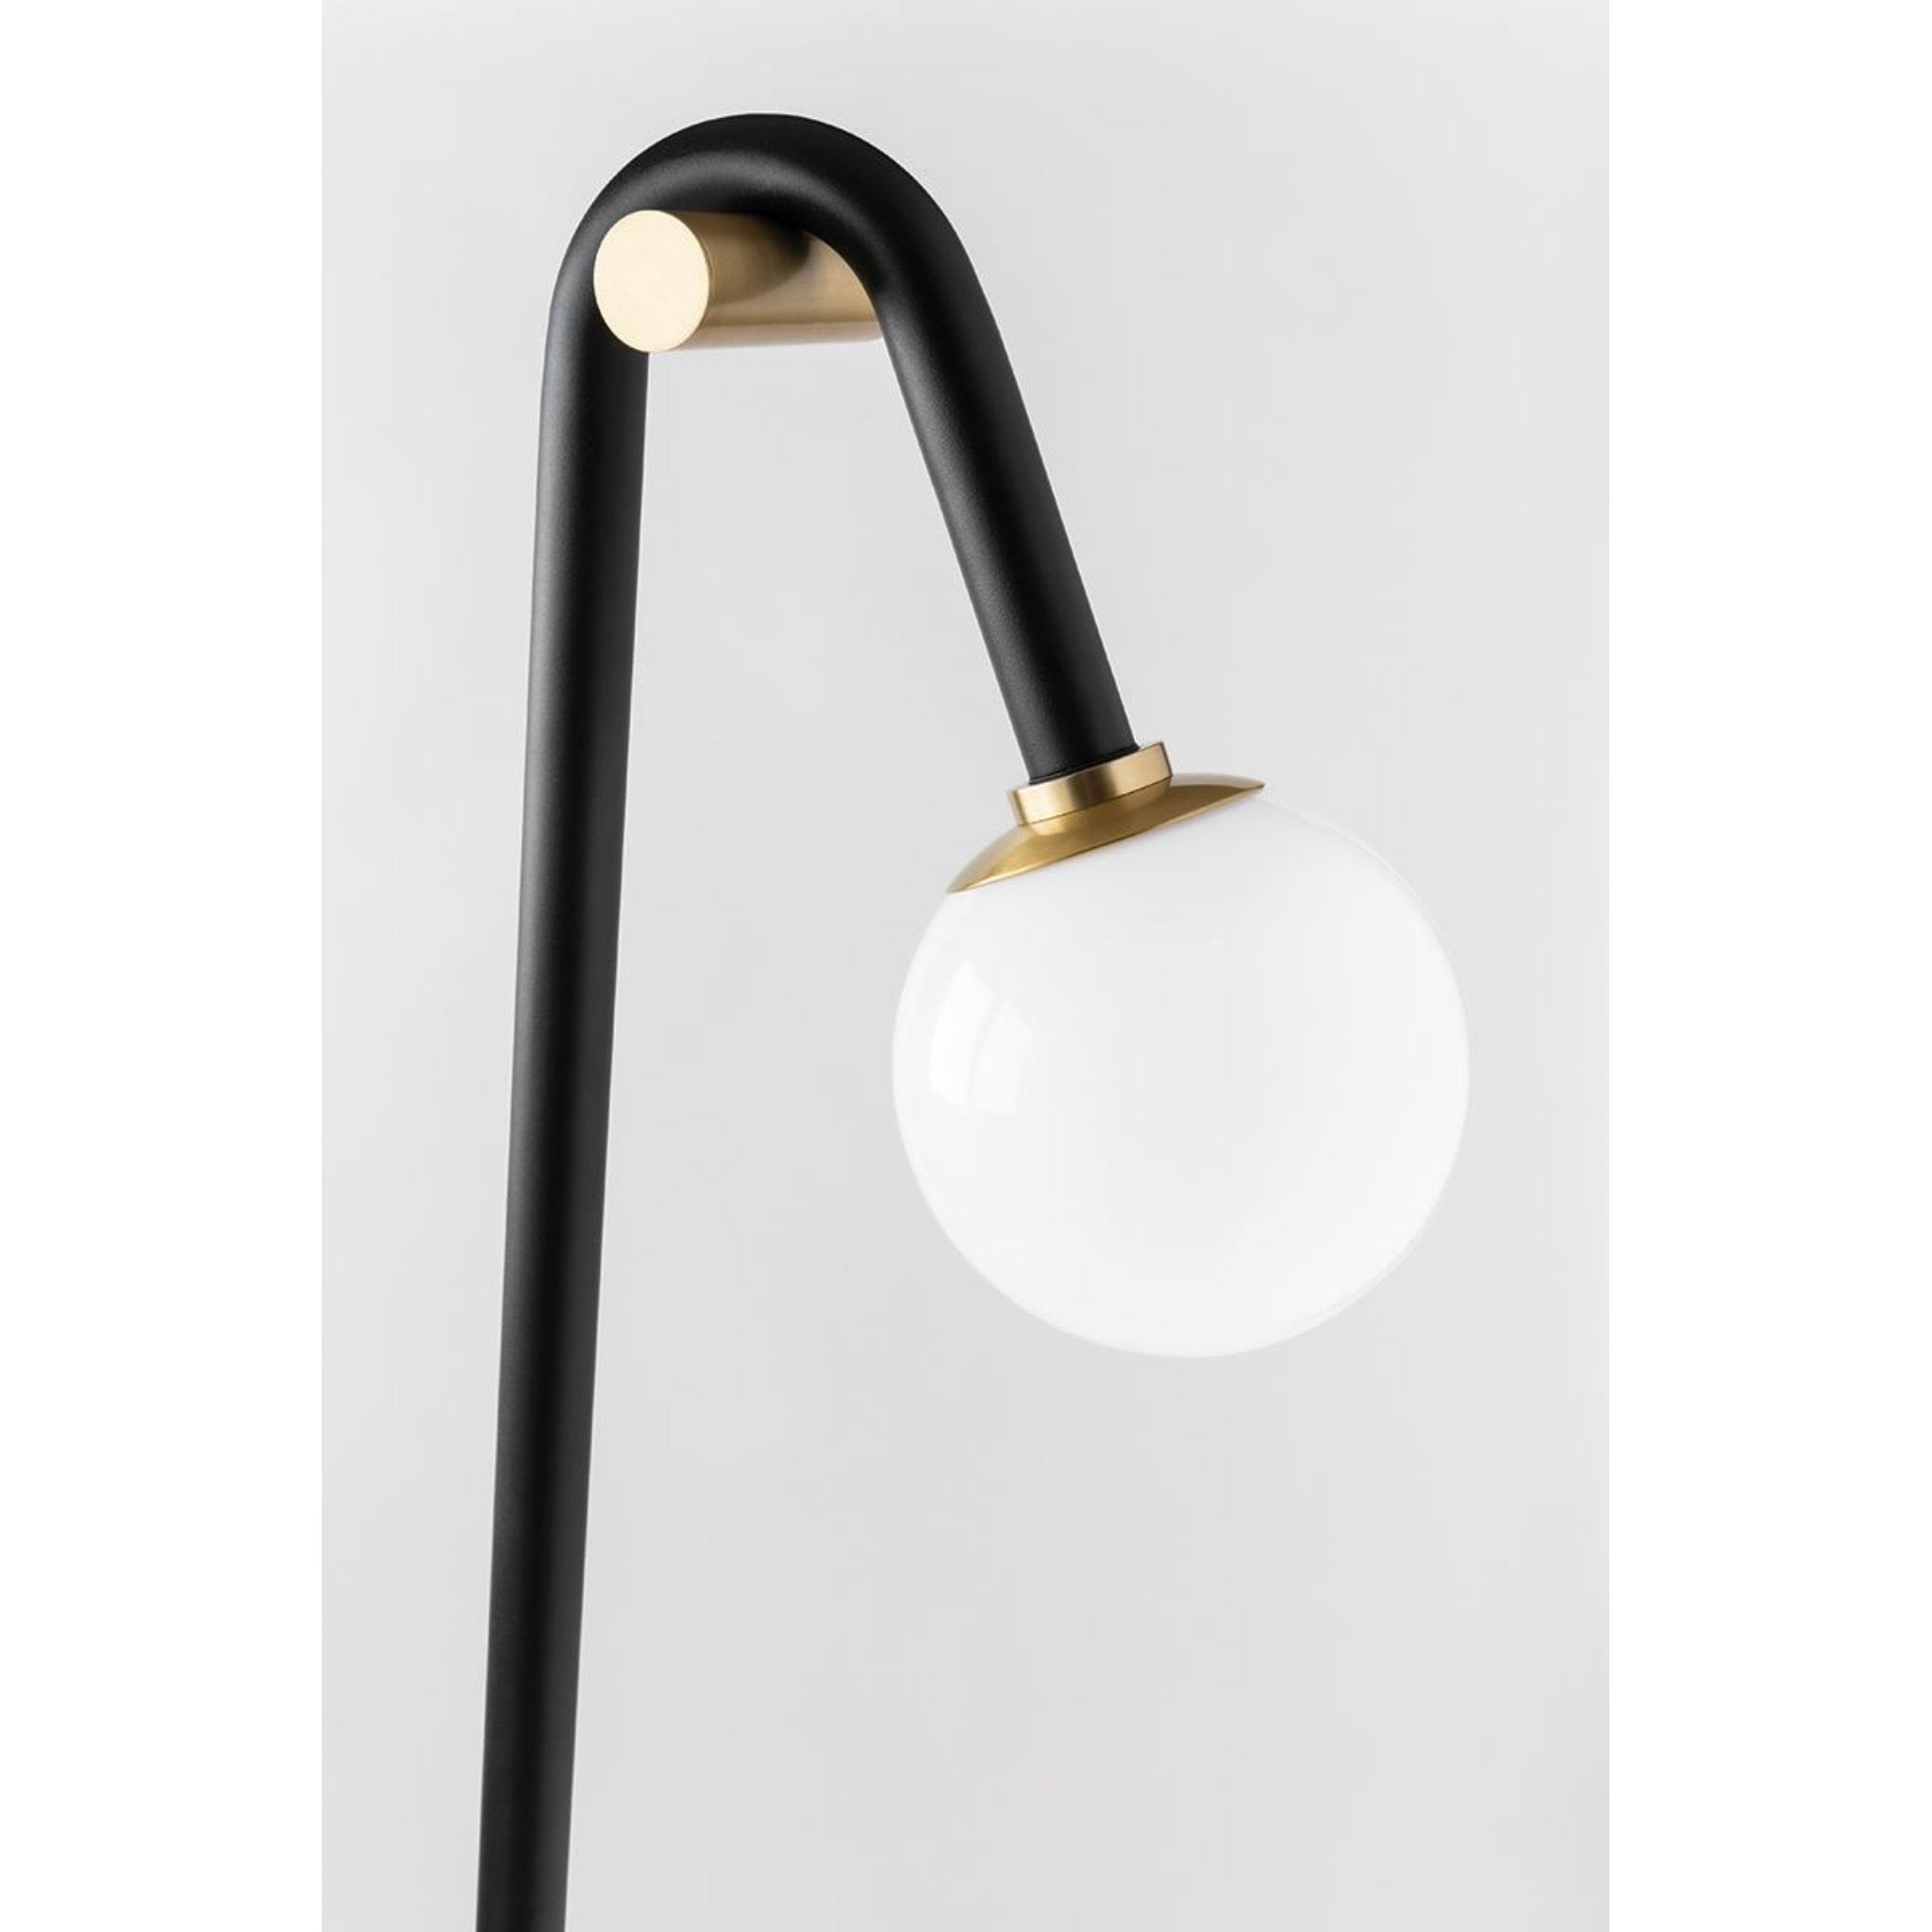 Whit 2-Light Wall Sconce in Polished Nickel/Black